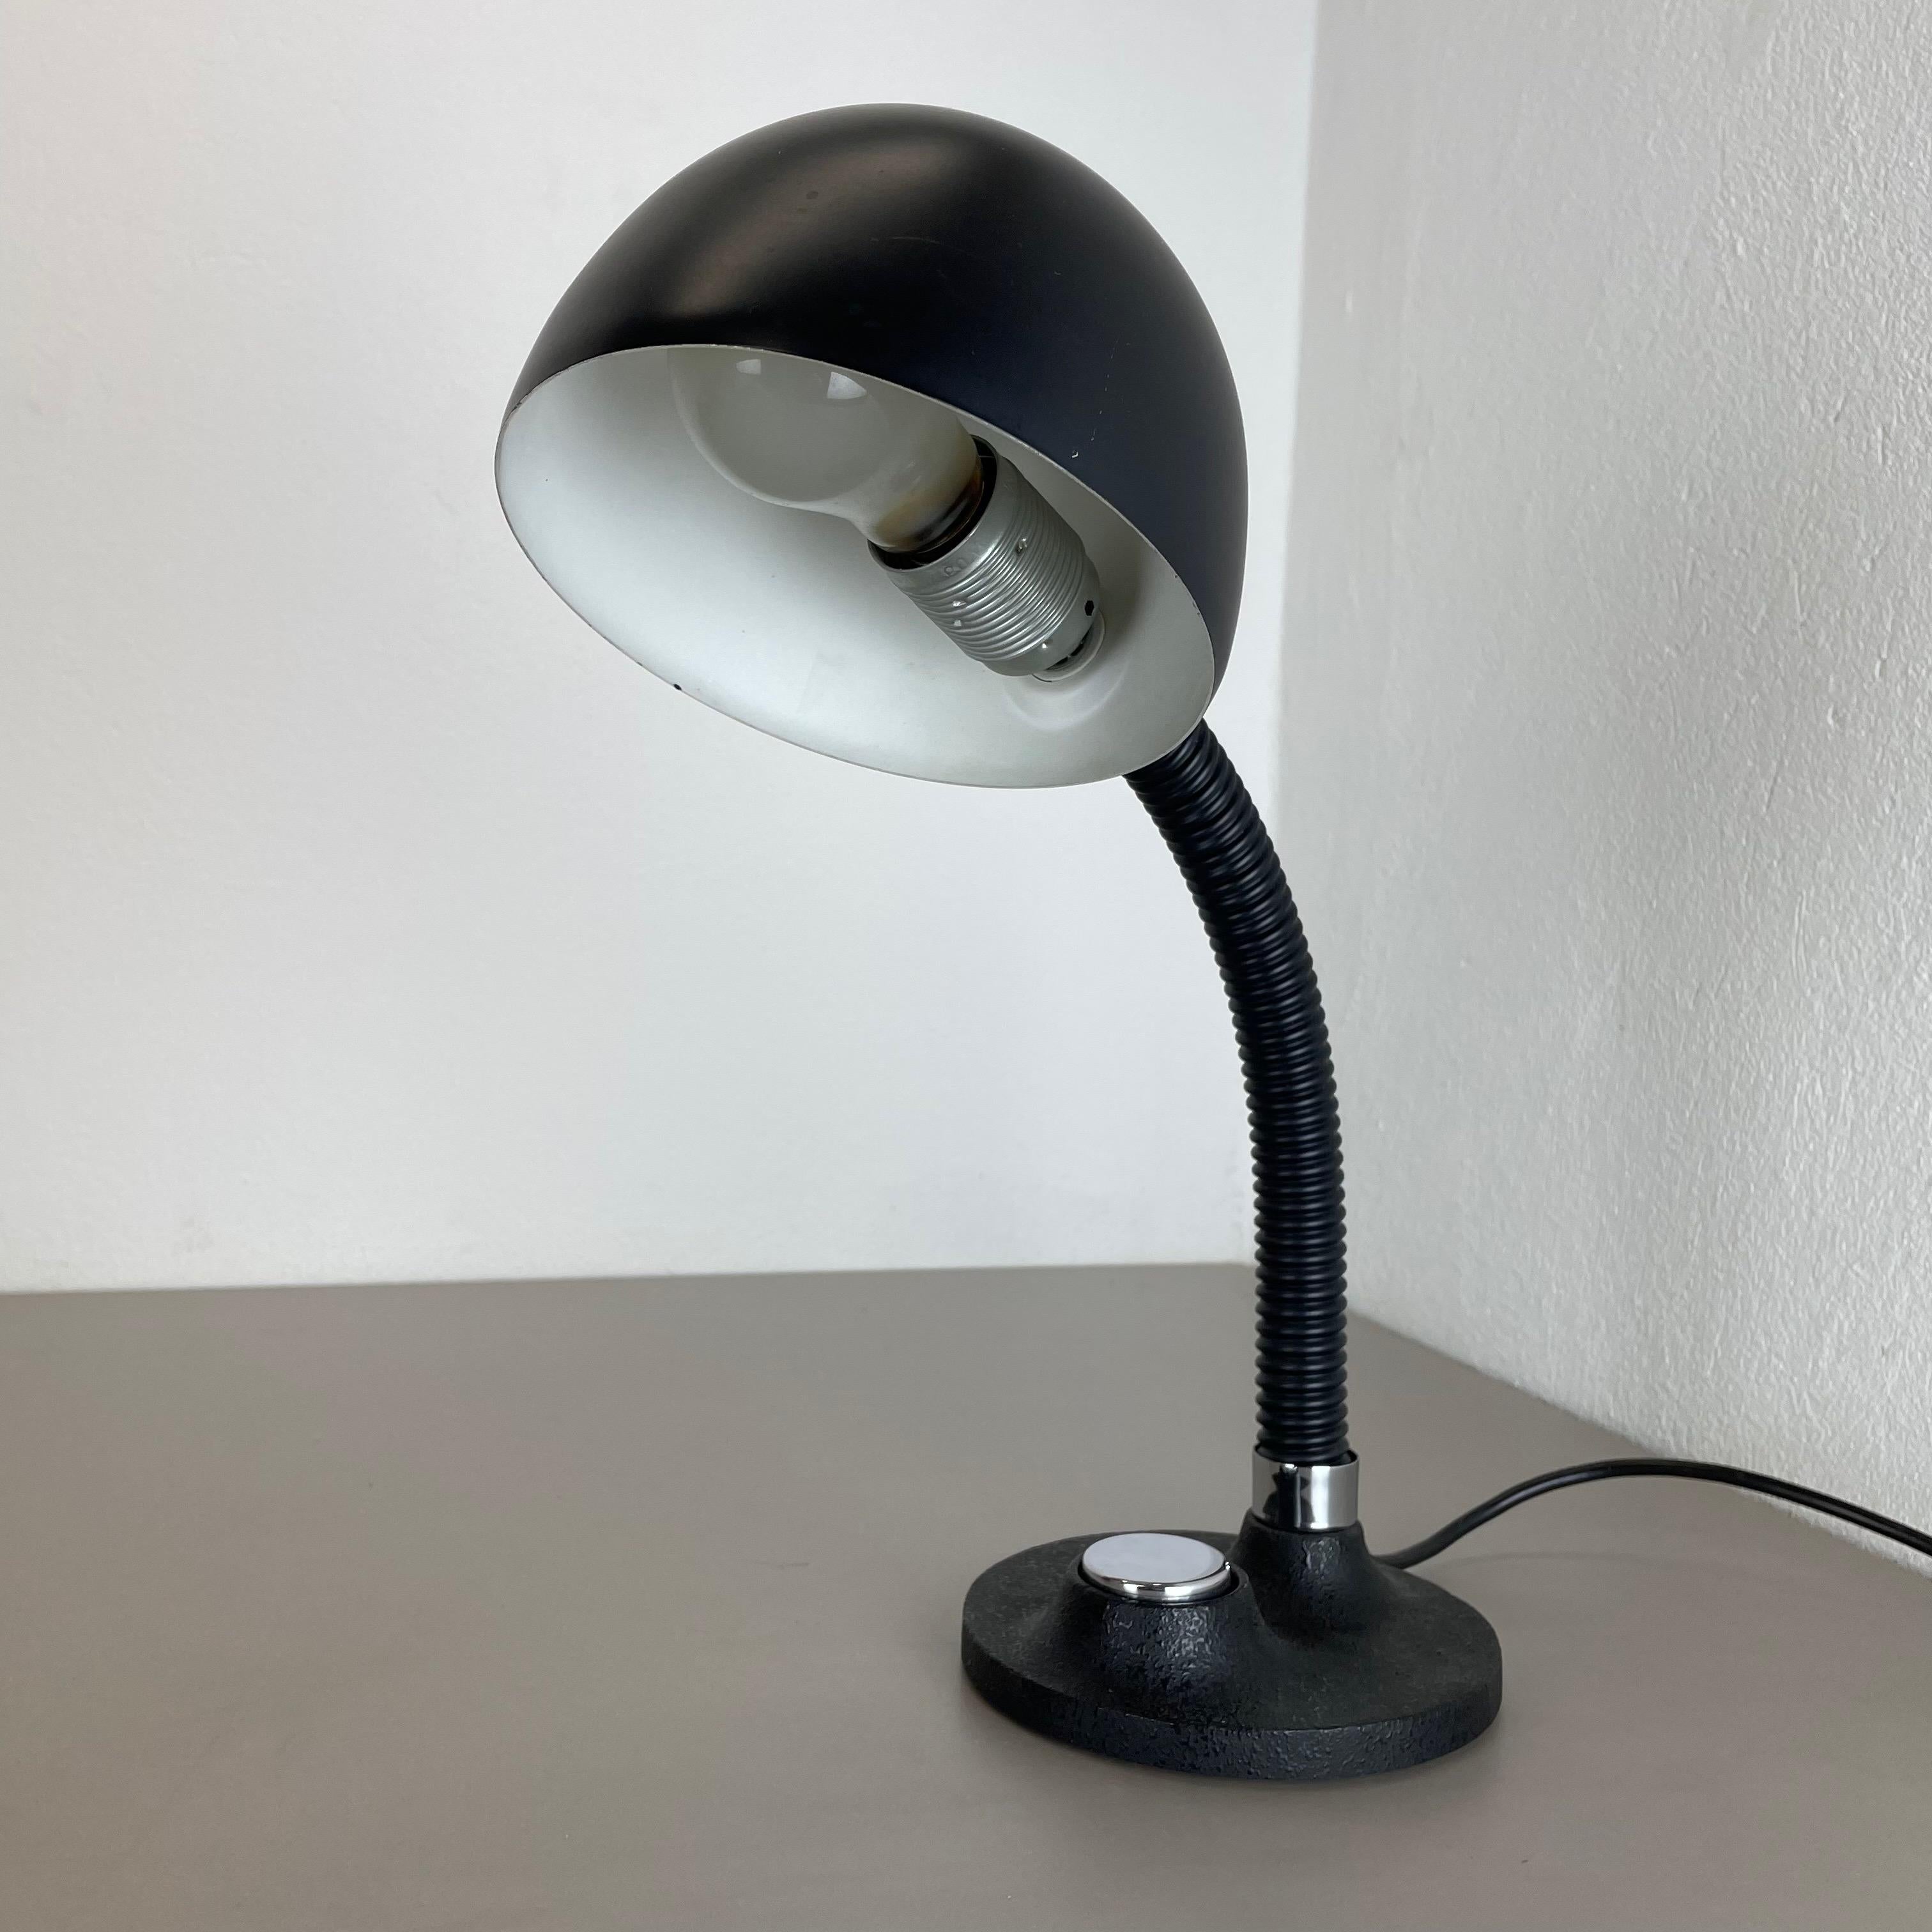 Modernist SPACE AGE Metal Table Light by Hillebrand Leuchten, Germany, 1970s For Sale 3